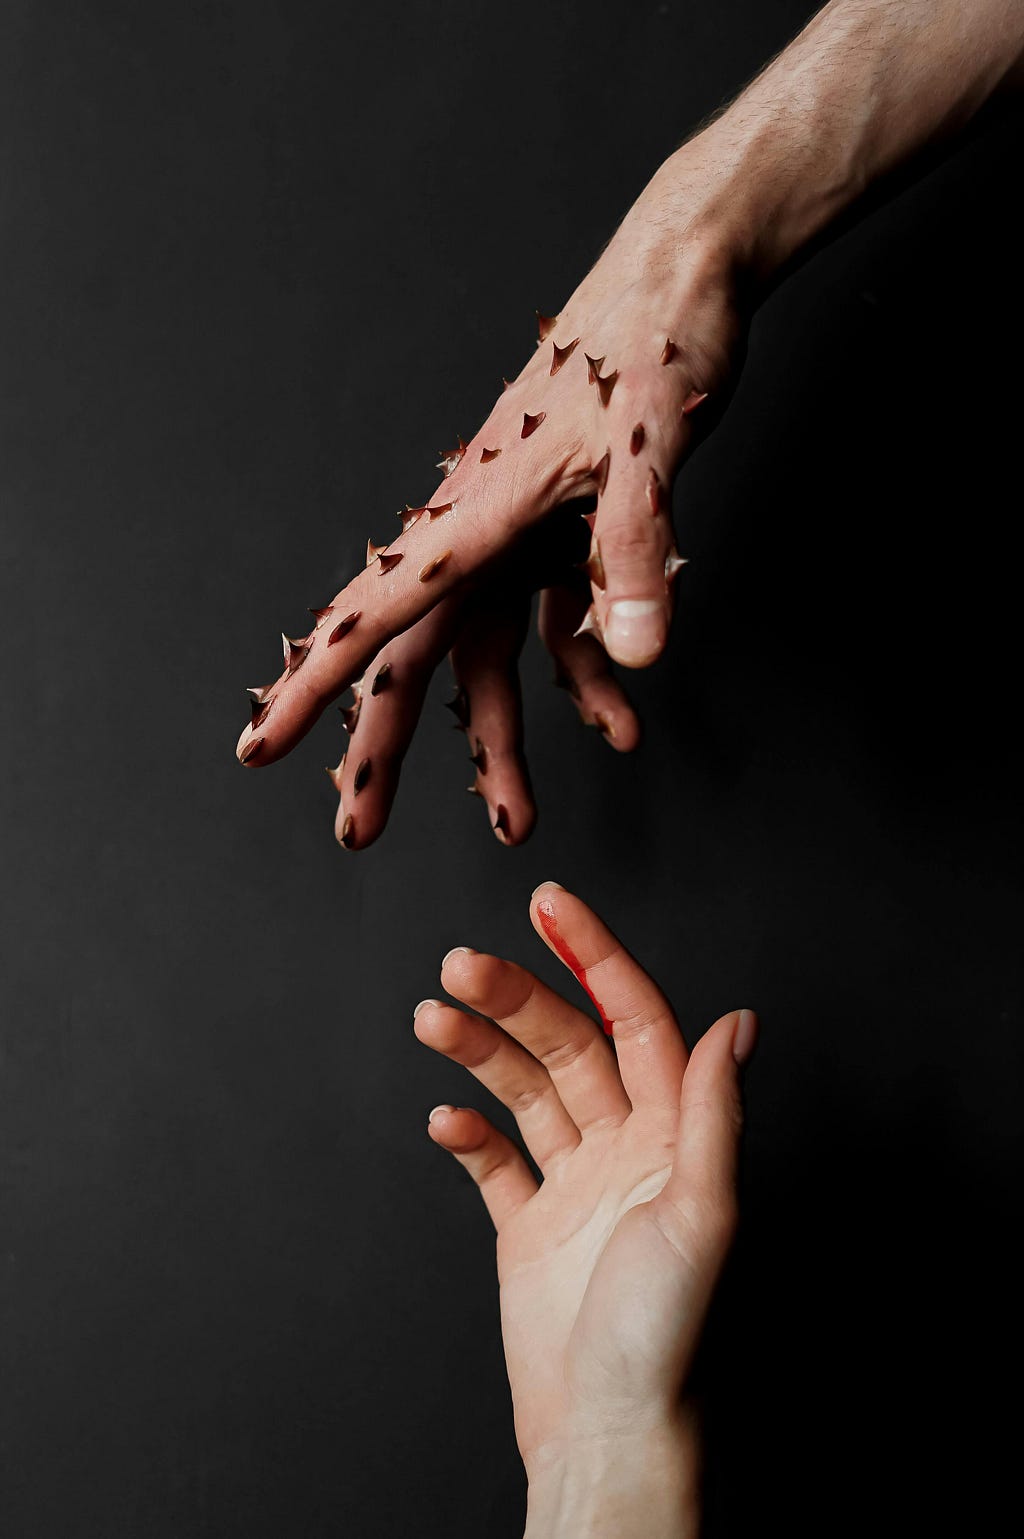 I concept art of a top hand with thorns directed towards a lower wounded hand that tries to reach out for the hands with thorn.